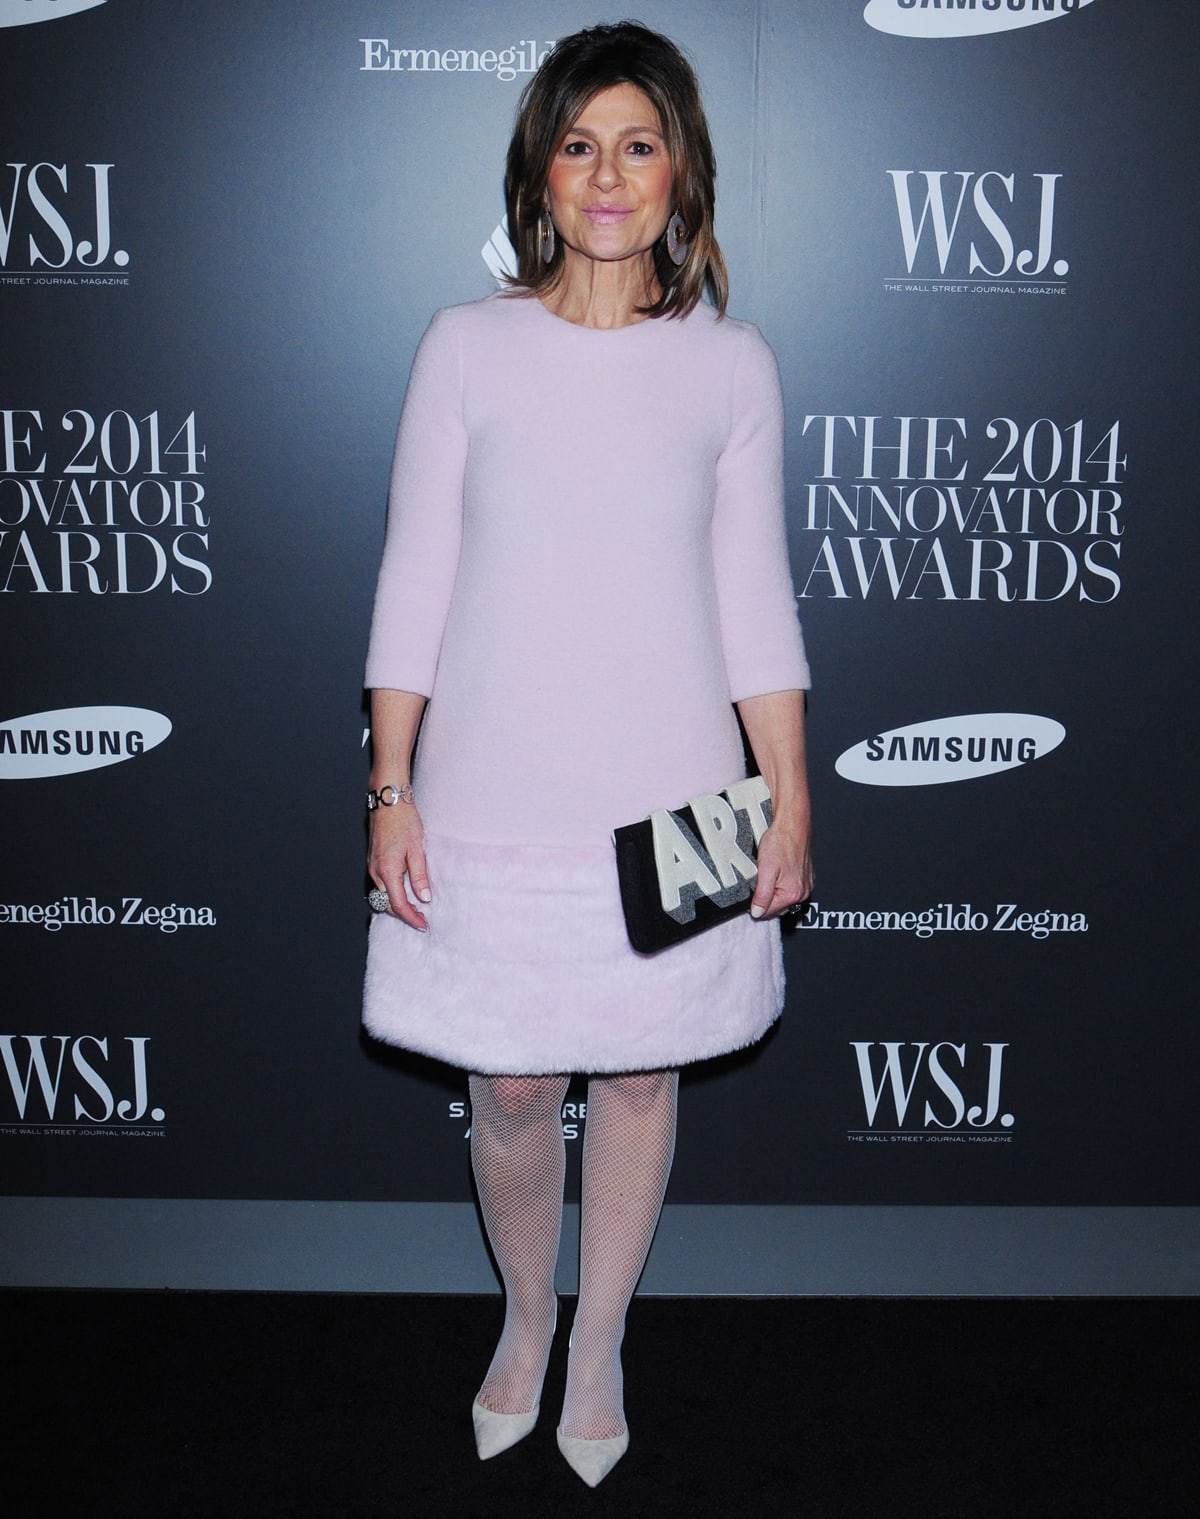 Fashion designer Lisa Perry radiates at the WSJ. Magazine 2014 Innovator Awards, blending contemporary flair with the spirited charm of the 1960s